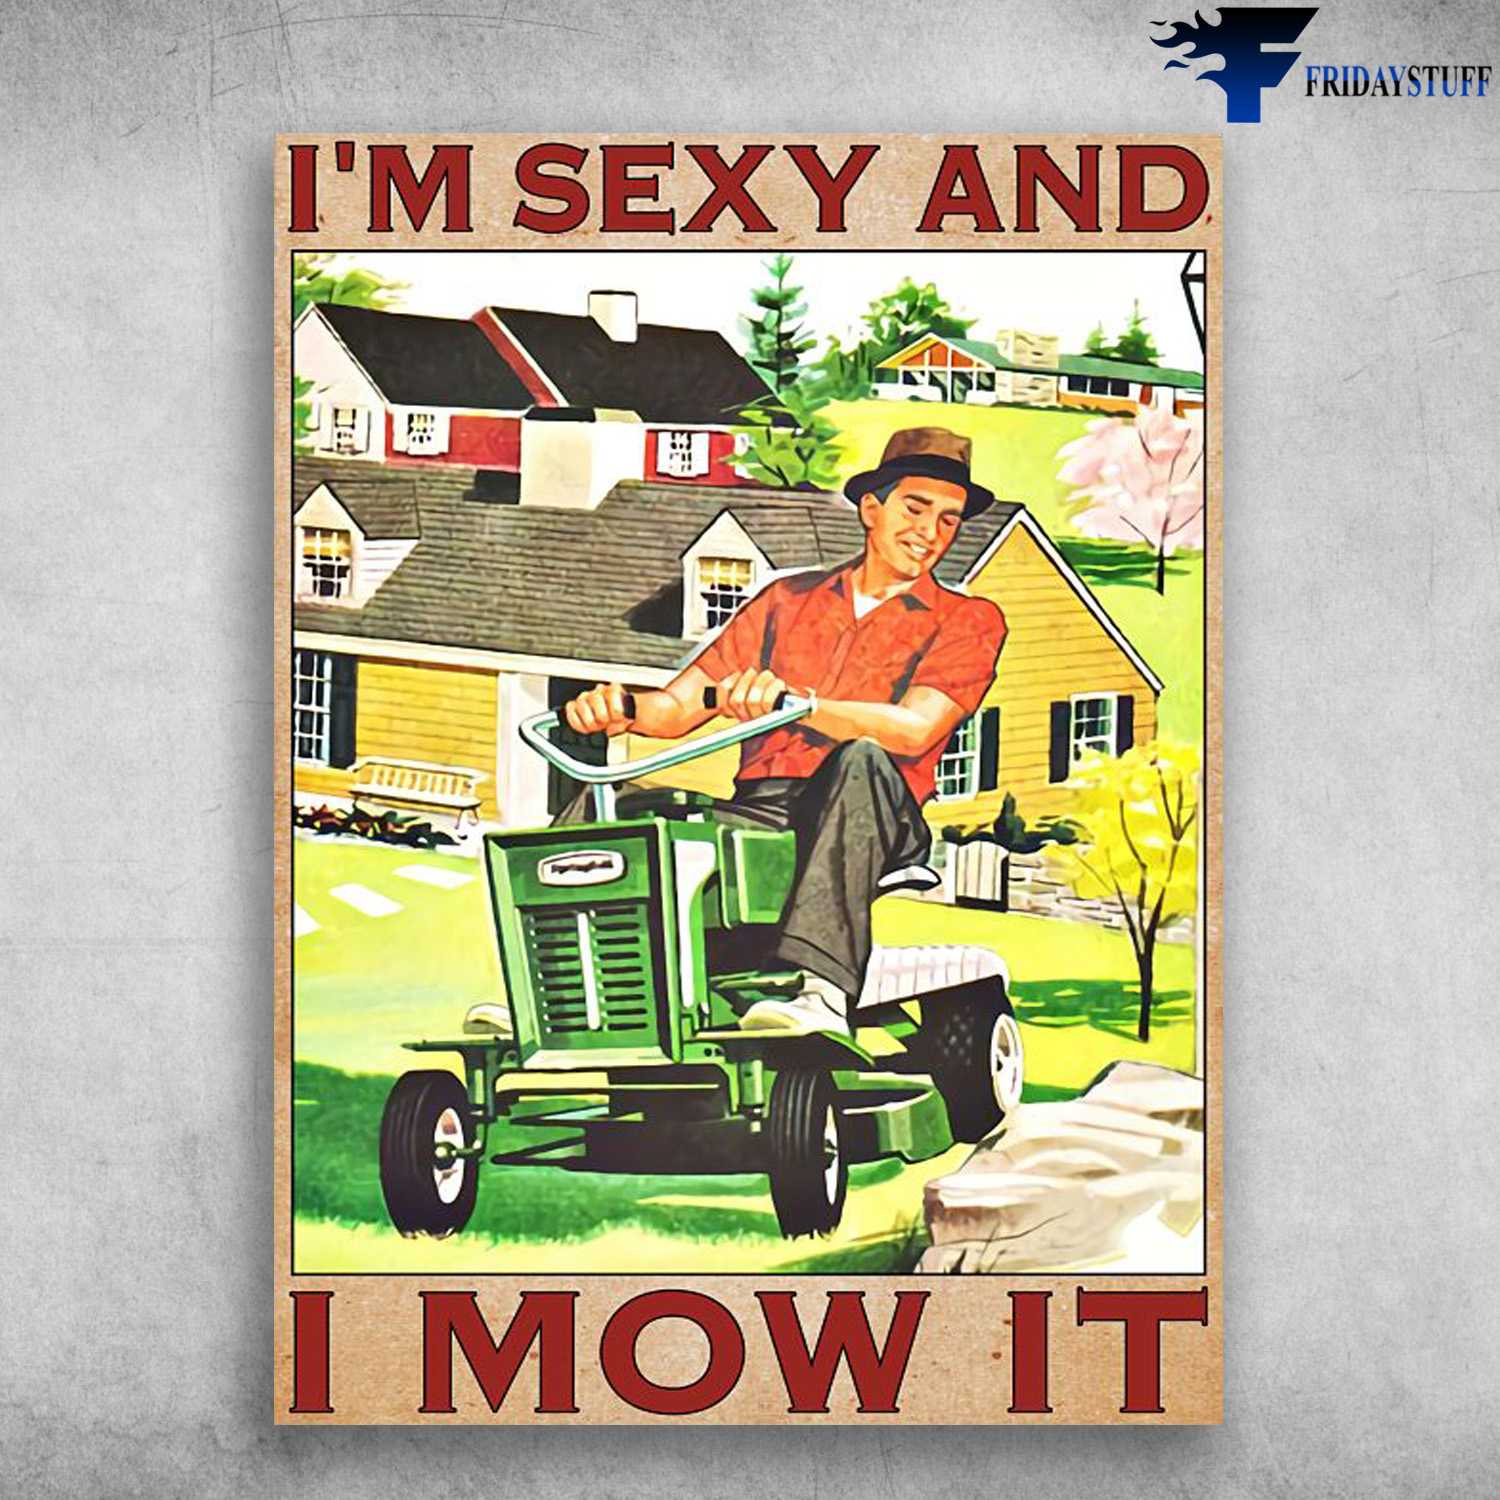 Old Man Poster, I'm Sexy And, I Mow It